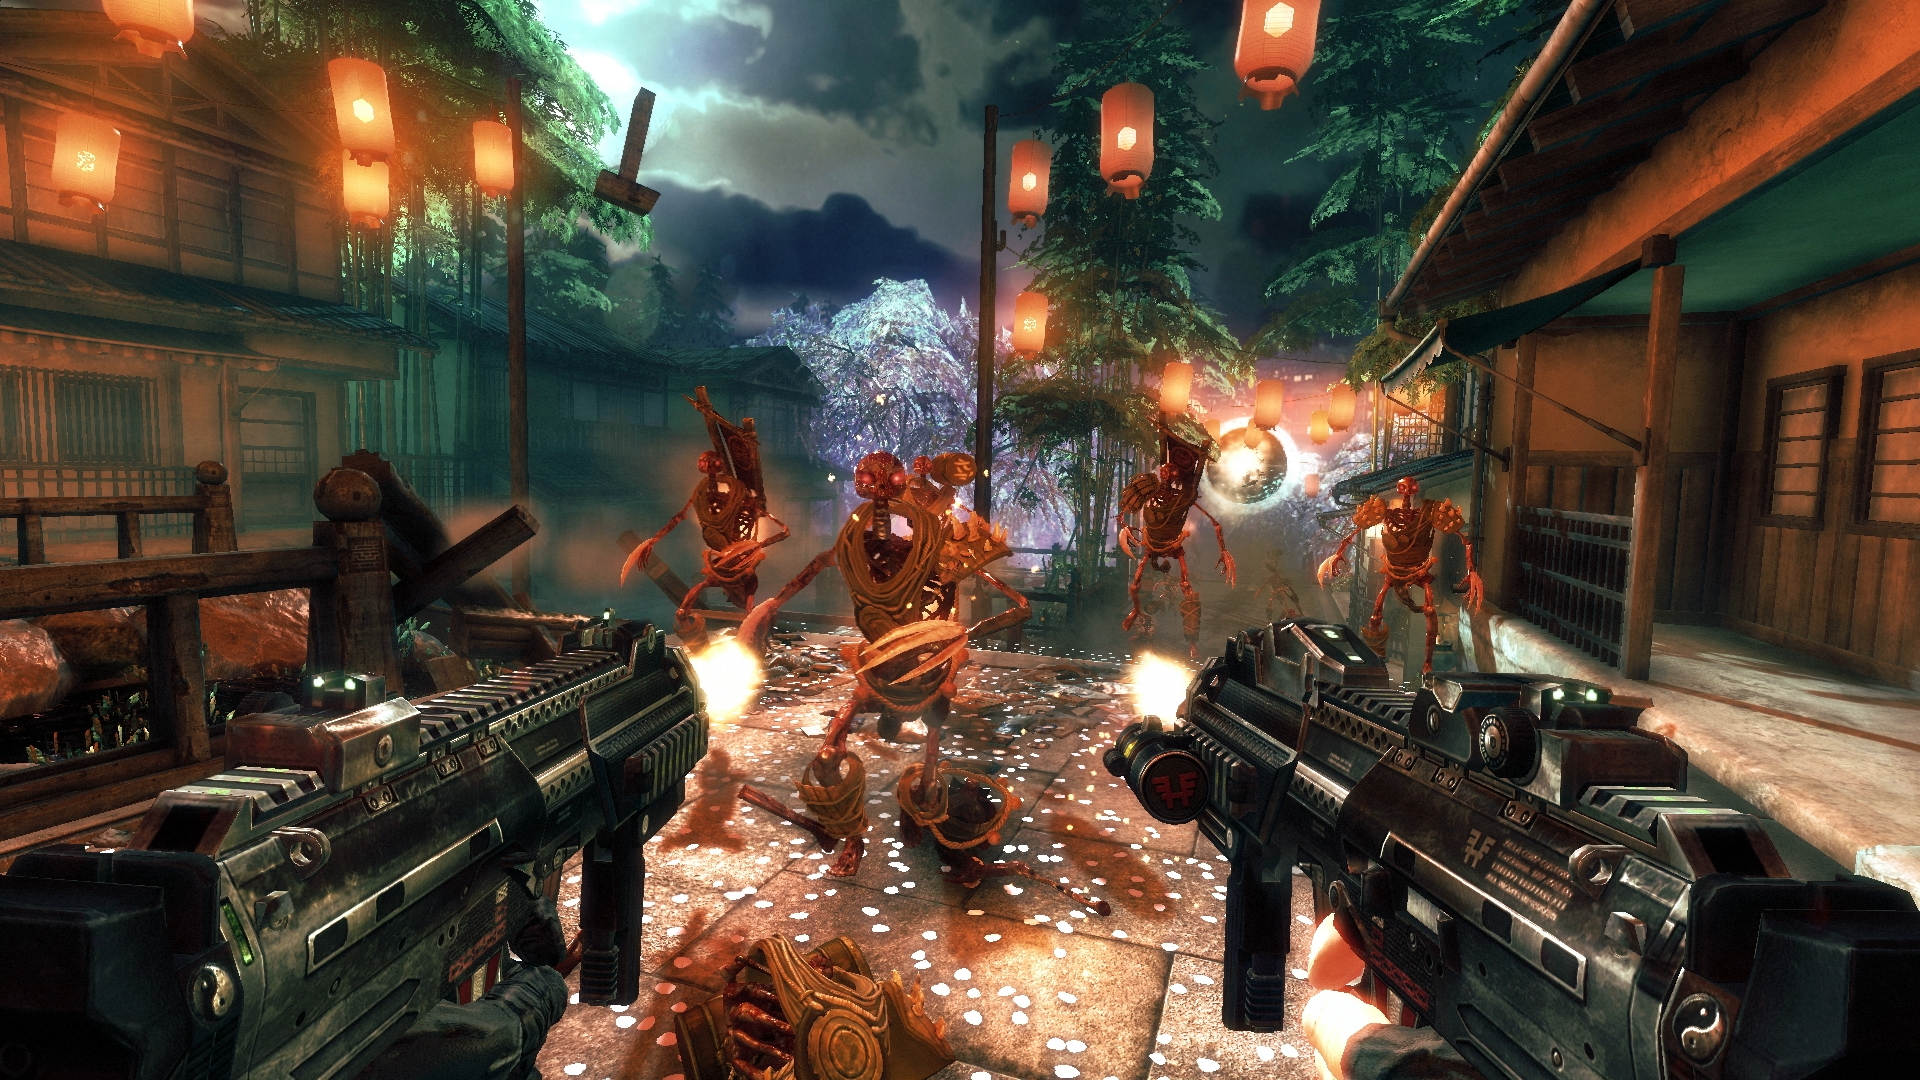 HQ Shadow Warrior Wallpapers | File 4135.68Kb